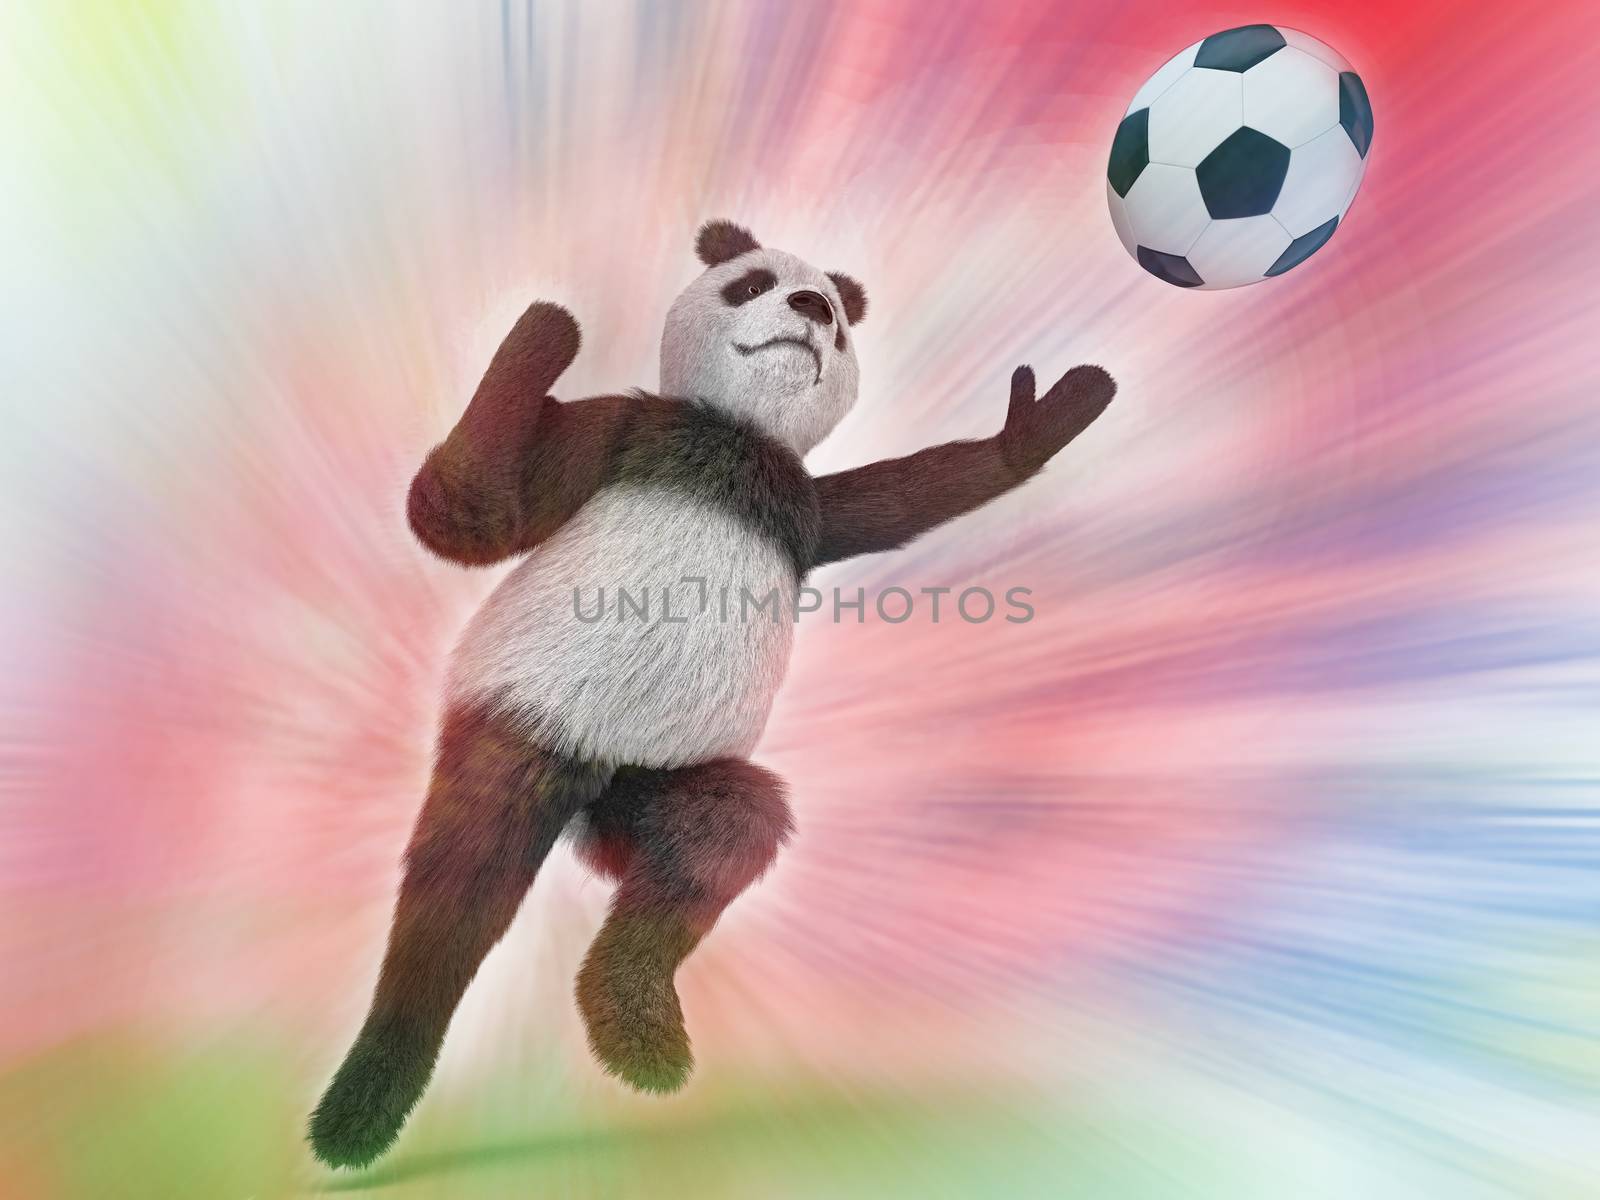 wild panda goalie in the rapid jump trying to catch a soccer ball on a colorful watercolor background blurred. upright character Bear goalkeeper catches pitch. by xtate